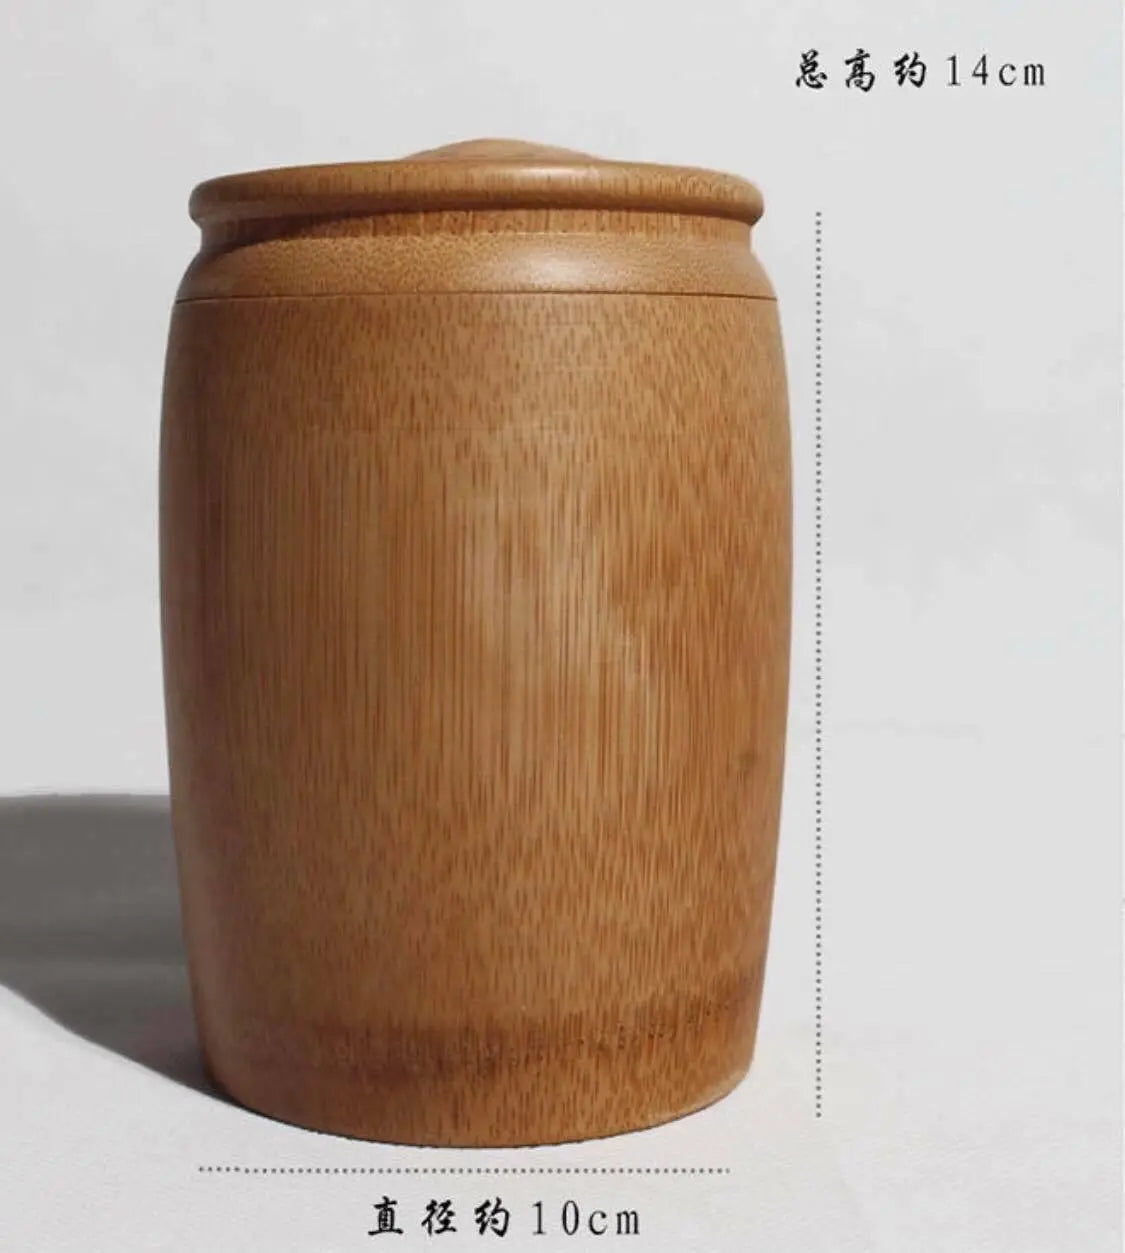 Bamboo Storage Jar Tea Coffee Sugar Canister container Tin Can Oriental Style everythingbamboo